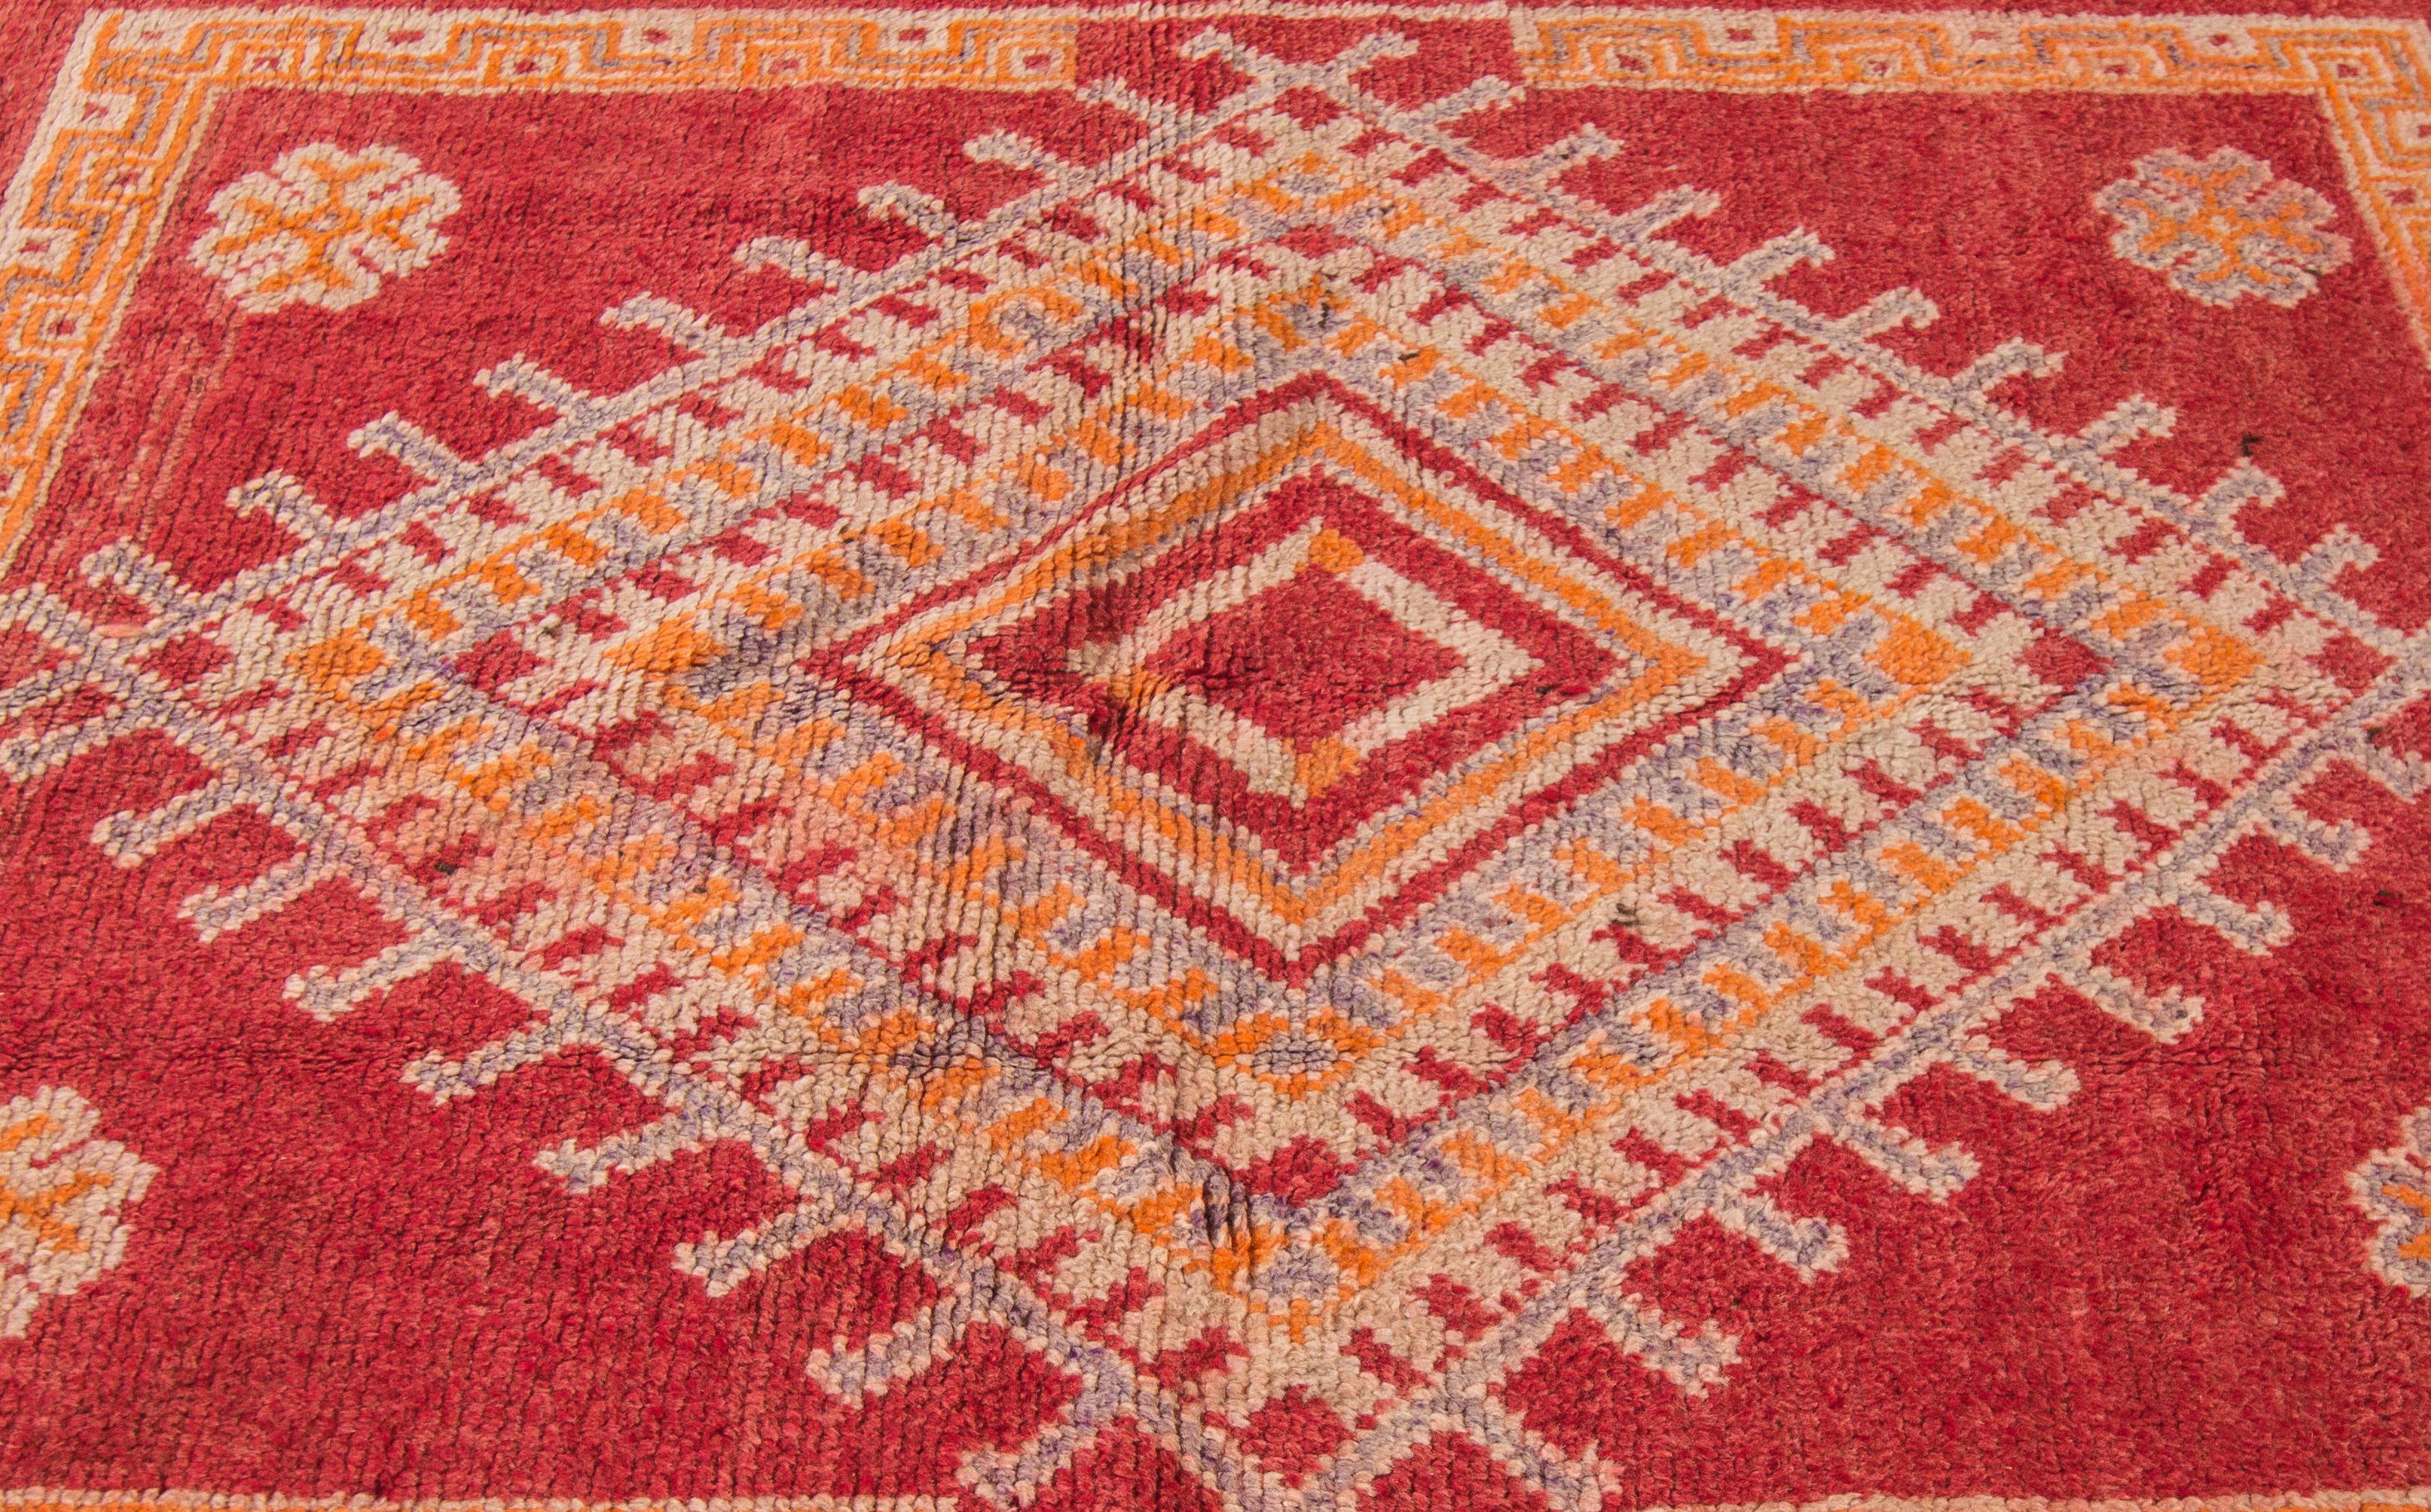 Wool Vintage 1940s Red and Orange Moroccan Rug, 5.10x13.02 For Sale